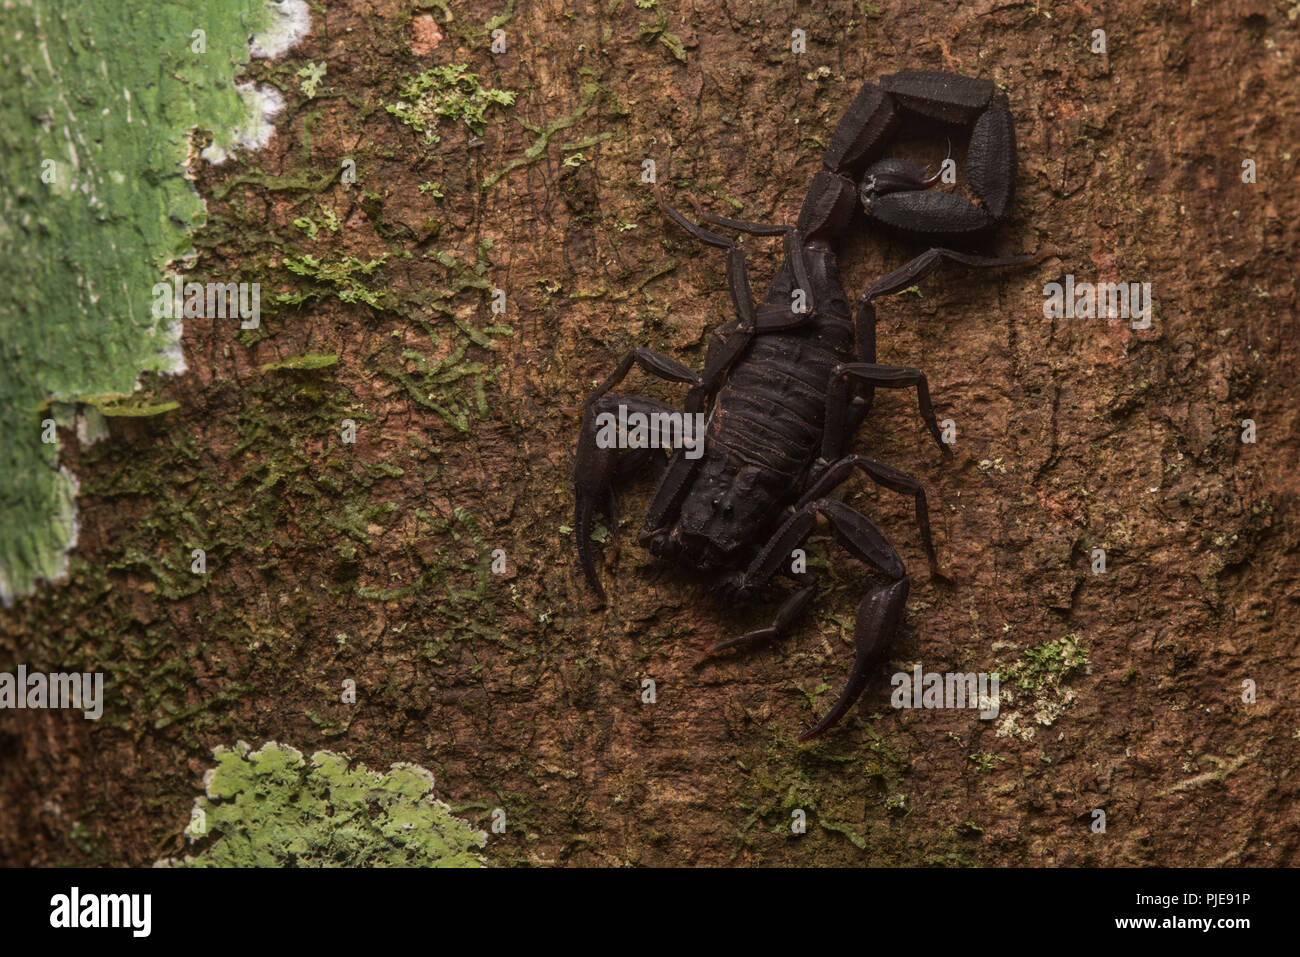 A species of scorpion in the genus Tityus climbs a tree. This genus contains several dangerously venomous species. Stock Photo